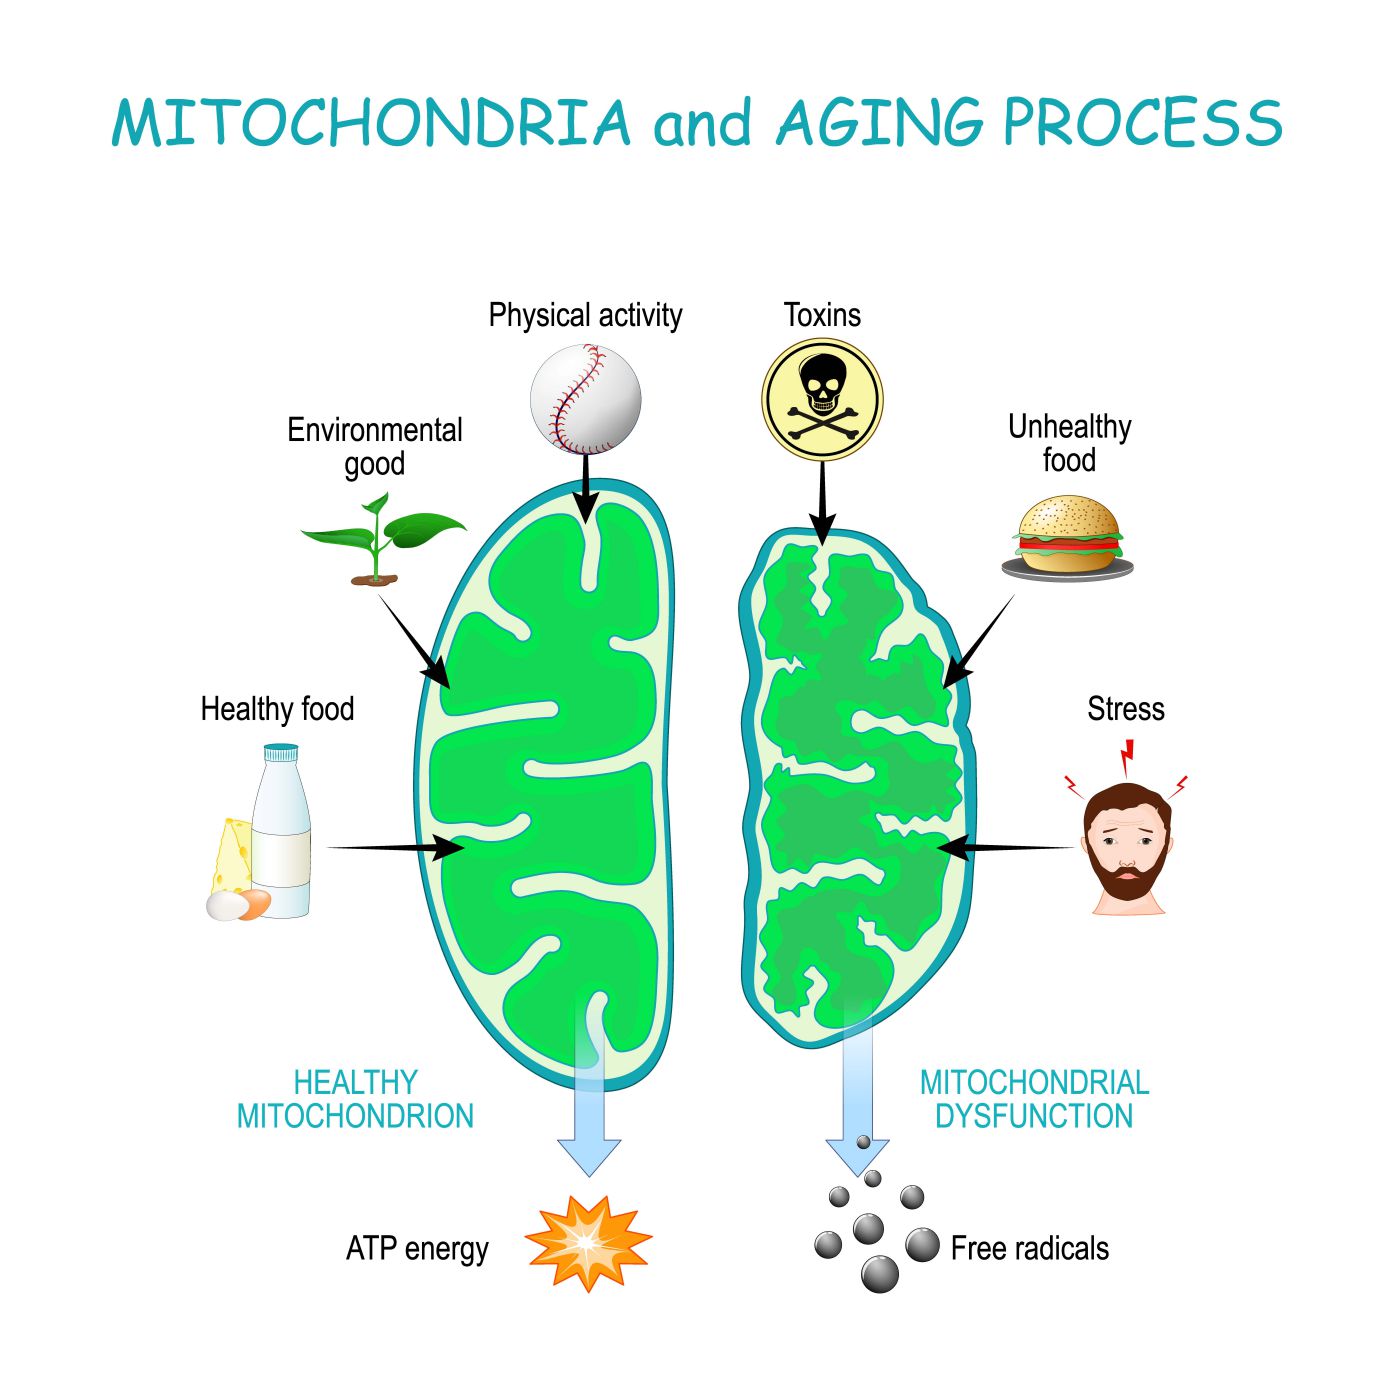 mitochondria and aging process